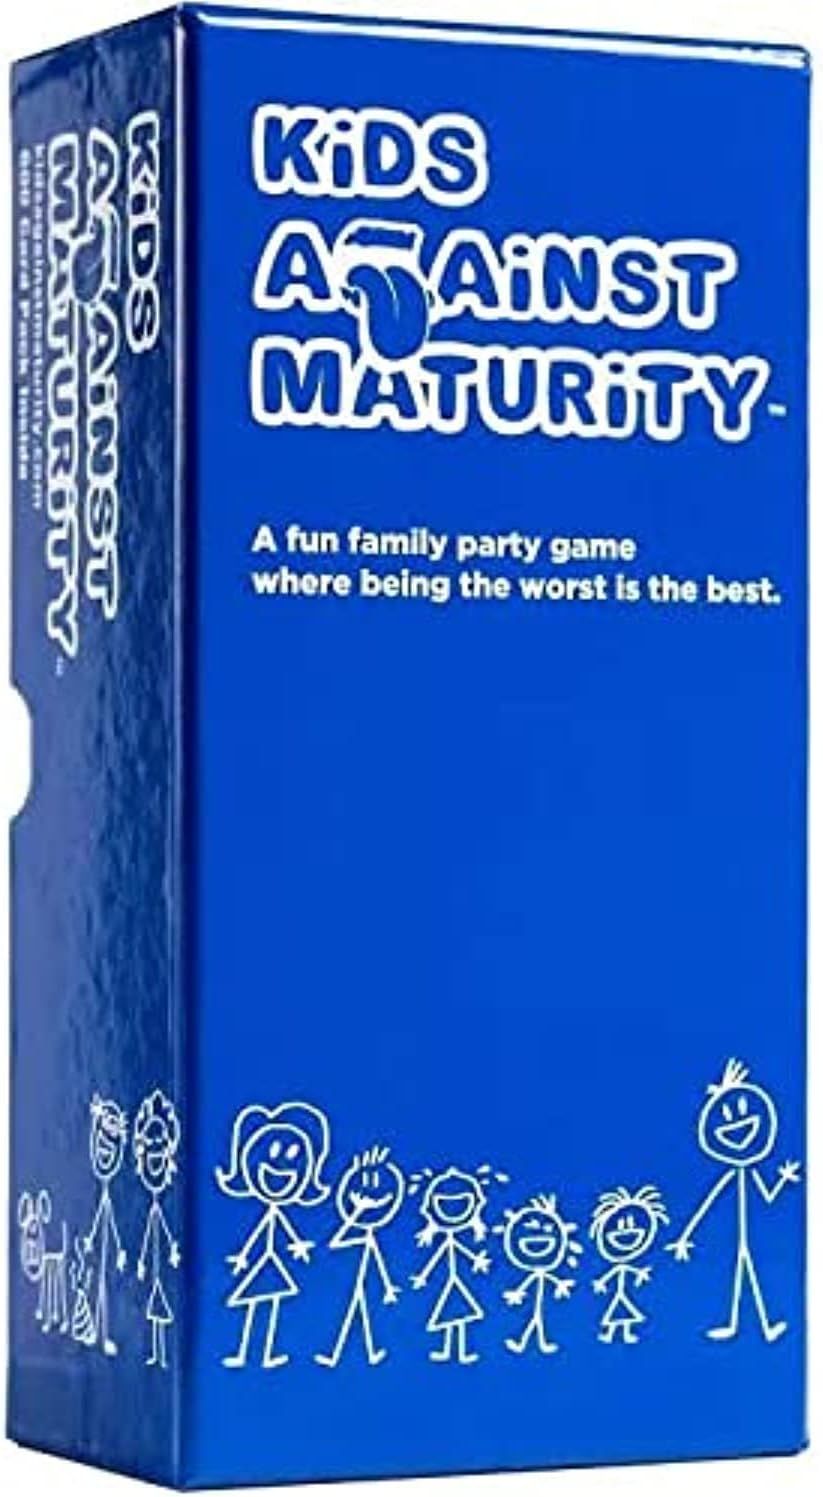 Kids Against Maturity: Card Game for Kids and Families, Super Fun Hilarious for Family Party Game... | Amazon (US)